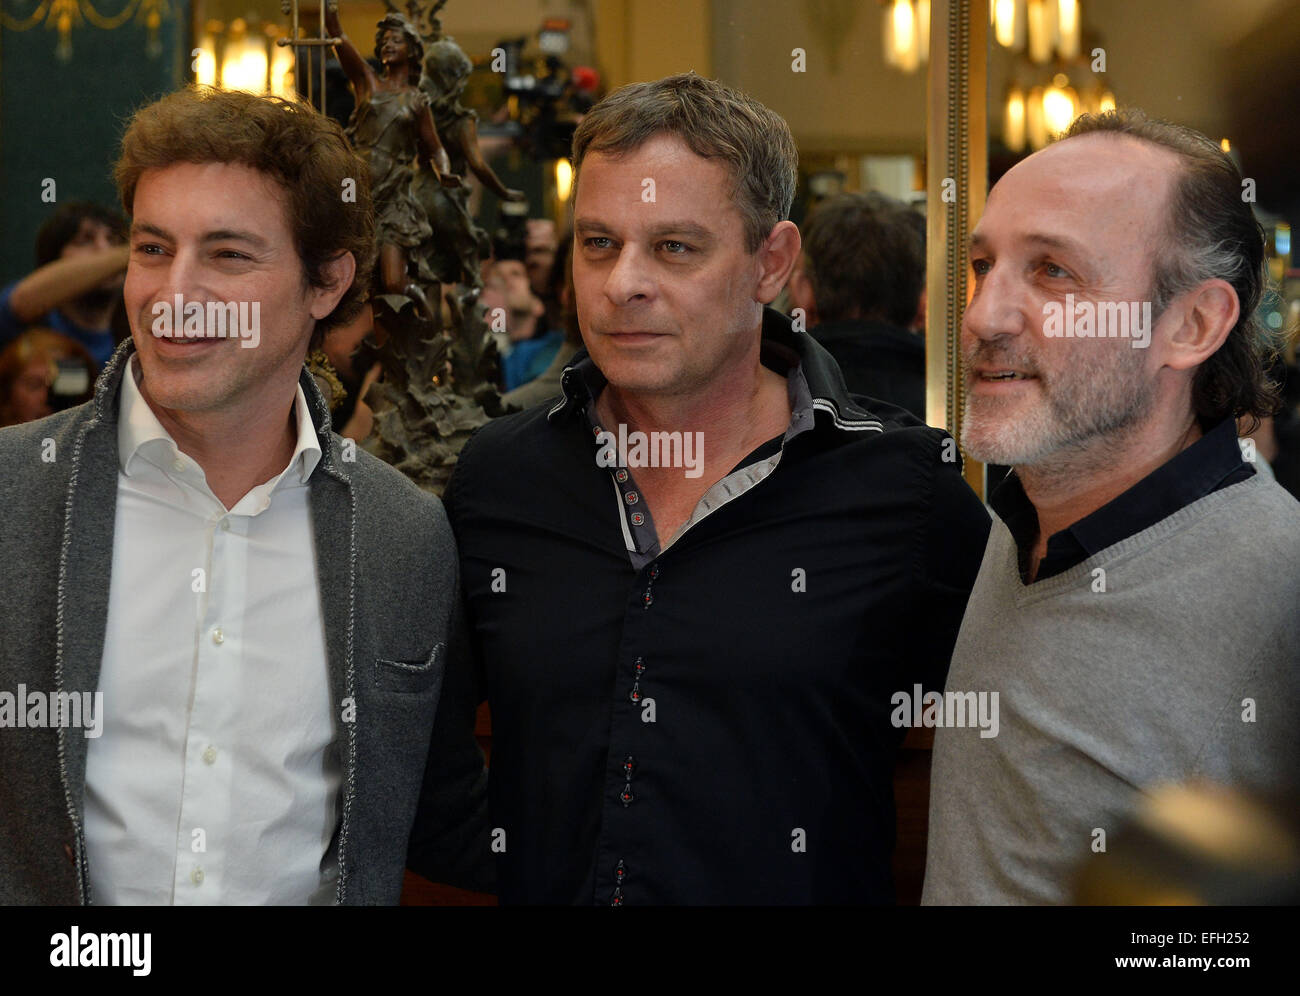 From left: German actor Gedeon Burkhard, director Filip Renc and Austrian actor Karl Markovics pose during the press conference on film about Czechoslovak film star Lida Baarova in Prague, Czech Republic, February 3, 2015. The lead role in the prepared Czech film about actress Baarova, who was mistress of Nazi Germany´s Propaganda Minister Joseph Goebbels before the war, will play Slovak actress Tana Pauhofova. Austrian actor Karl Markovics will play Goebbels, while one of the most famous German actors, Gedeon Burkhard, was cast for the role of actor Gustav Froehlich, who was Baarova´s partner Stock Photo